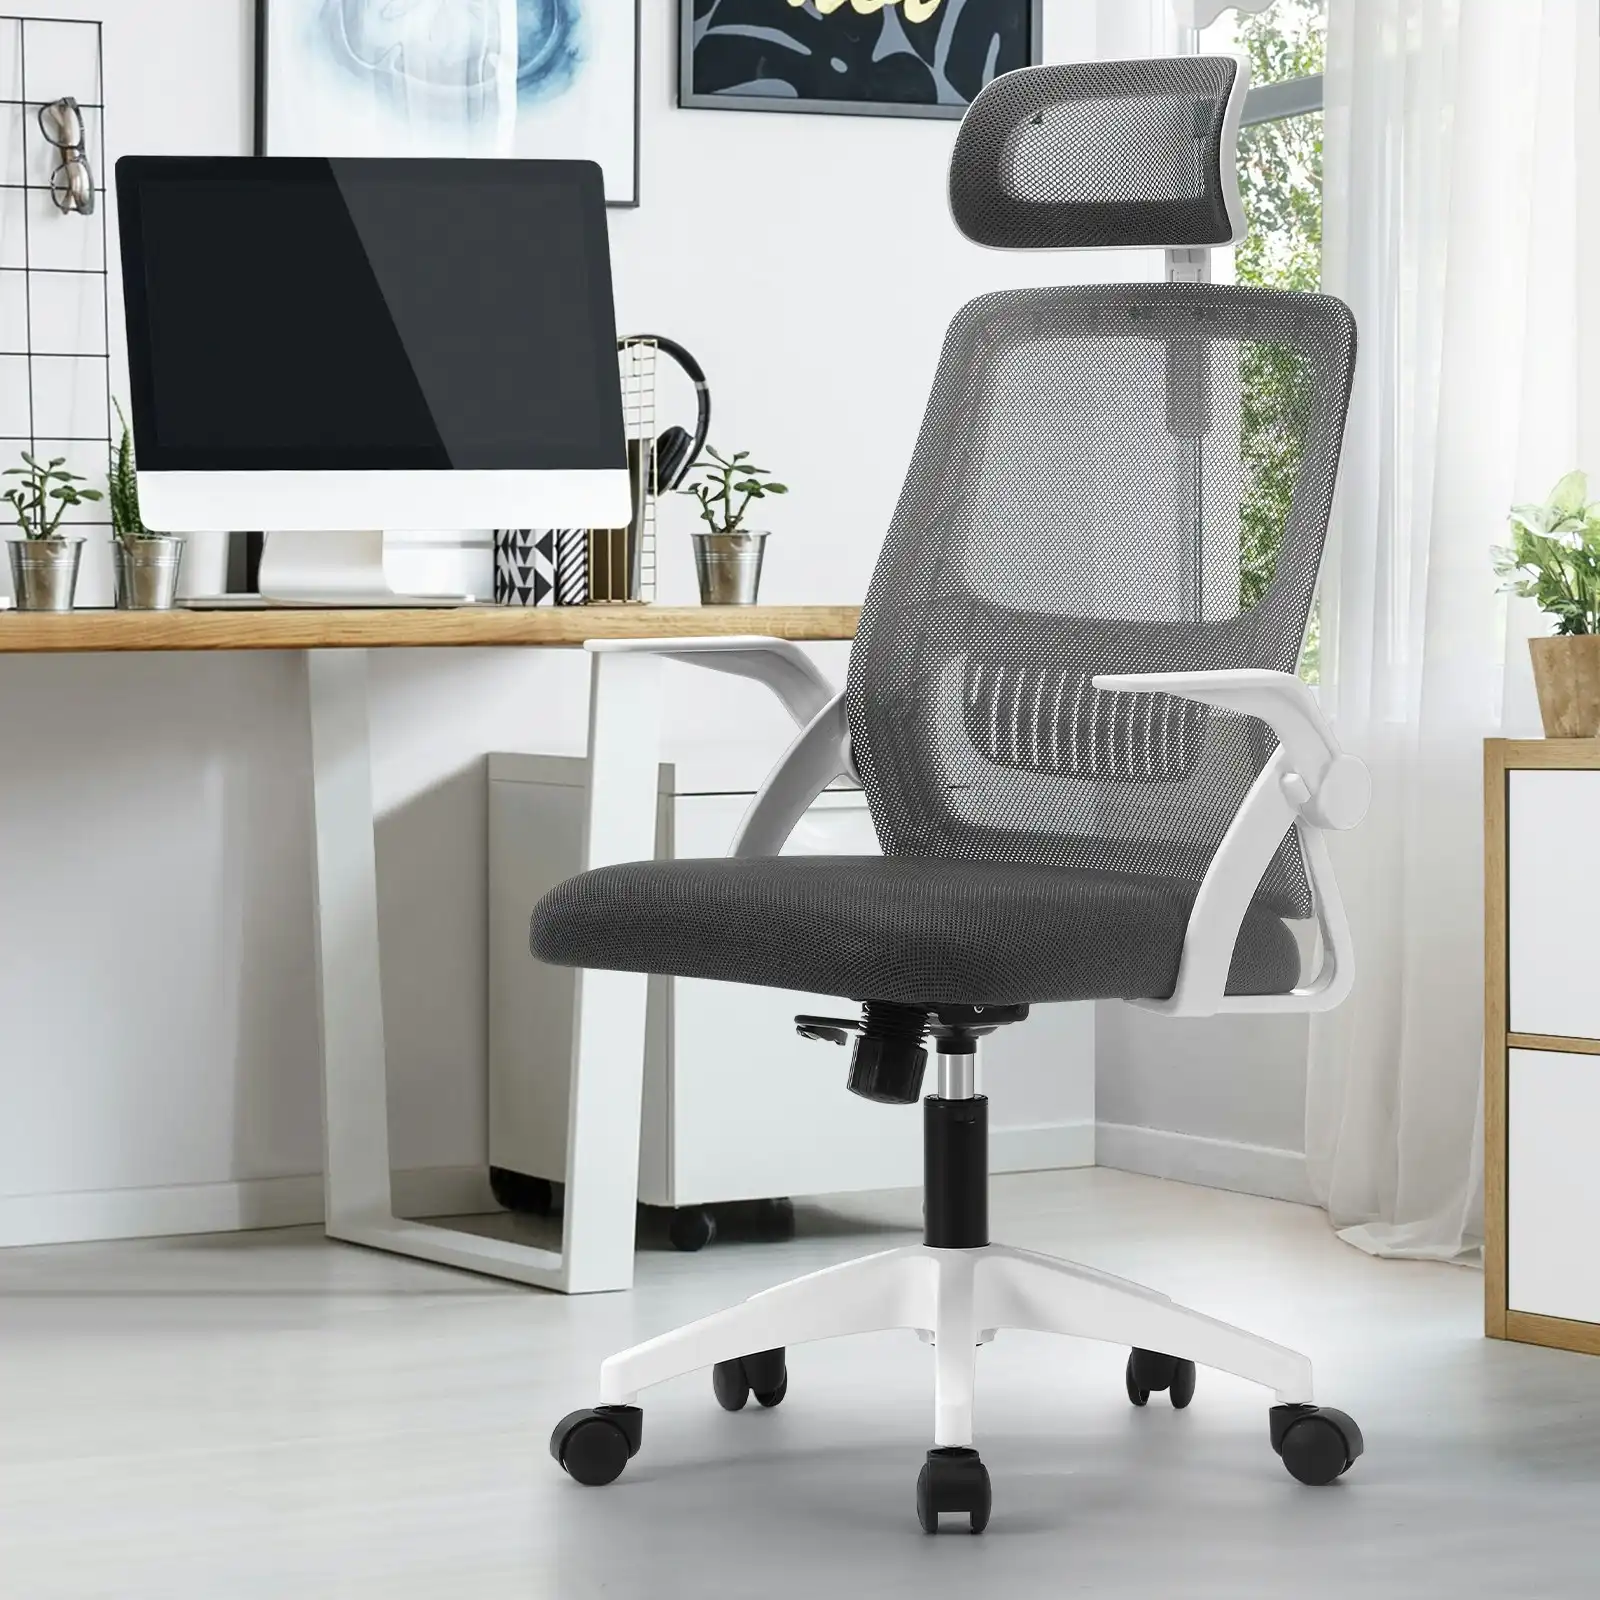 Oikiture Mesh Office Chair Executive Fabric Gaming Seat Racing Tilt Computer Dark Grey&White